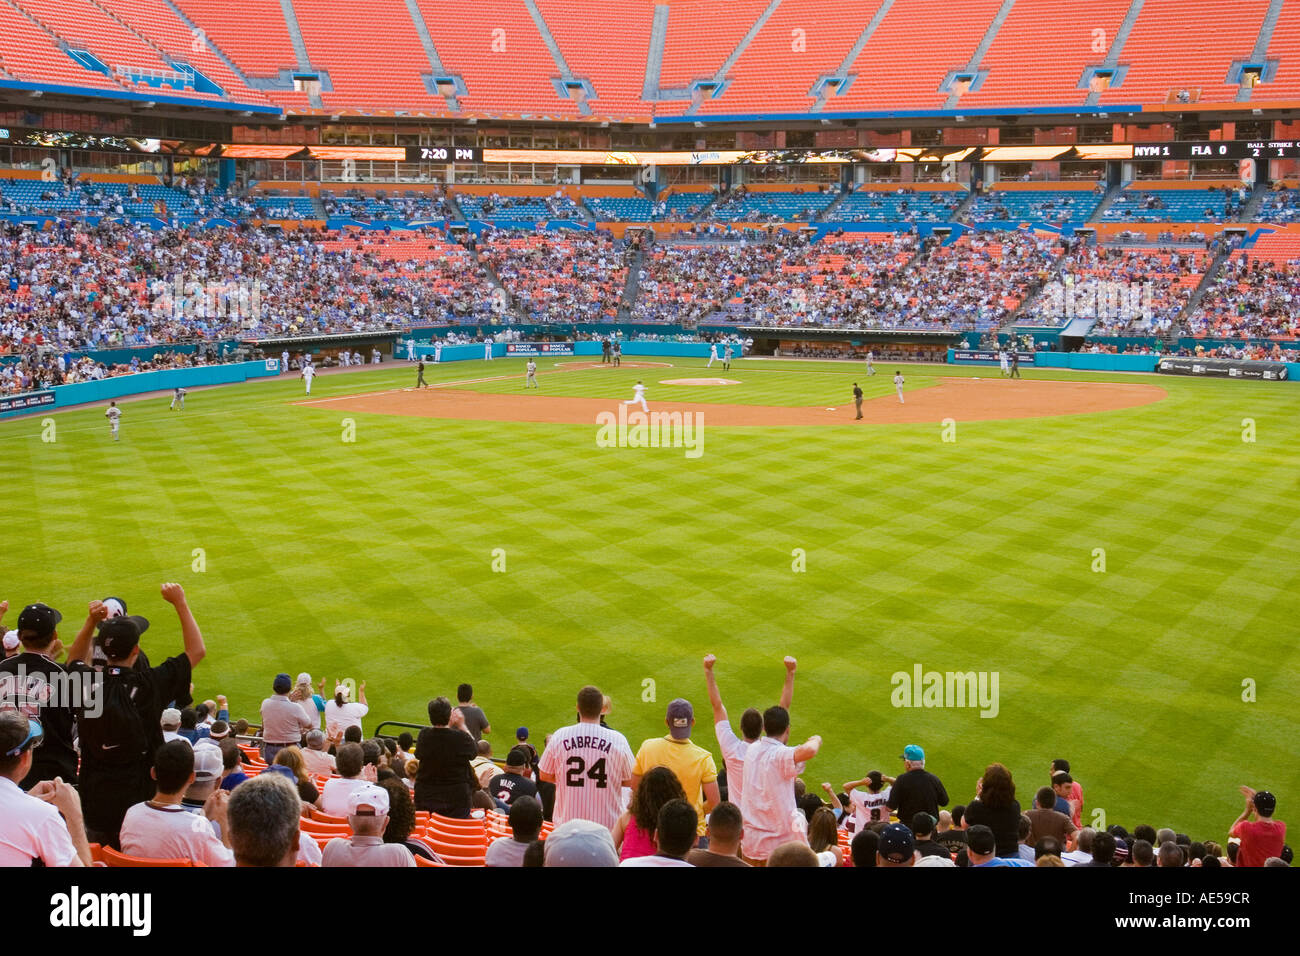 Crowd in the outfield stands at Dolphin Stadium standing and cheering their team Stock Photo